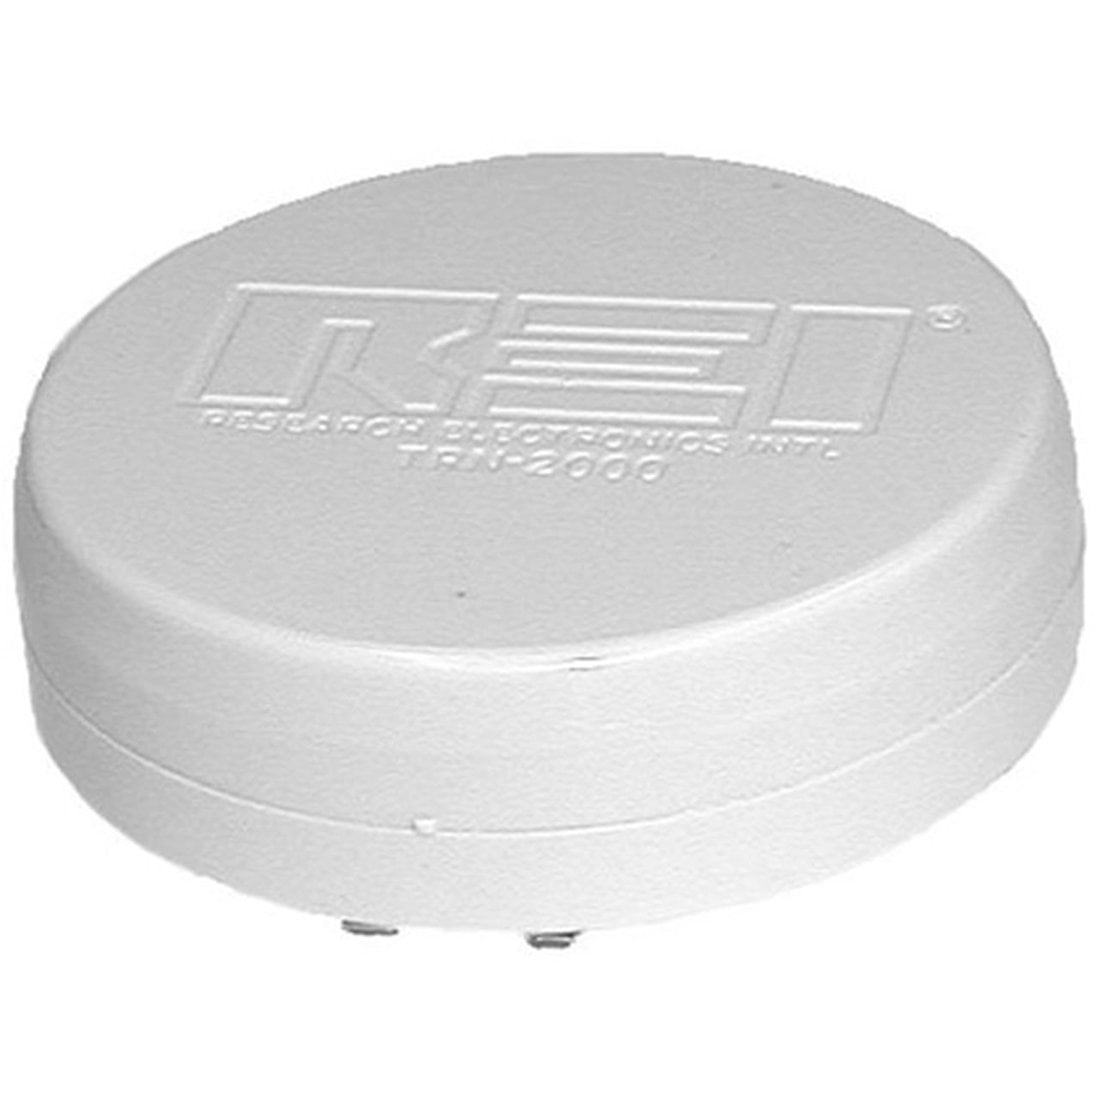 ANG2200 White Noise Generator Small Transducer for ANG2200